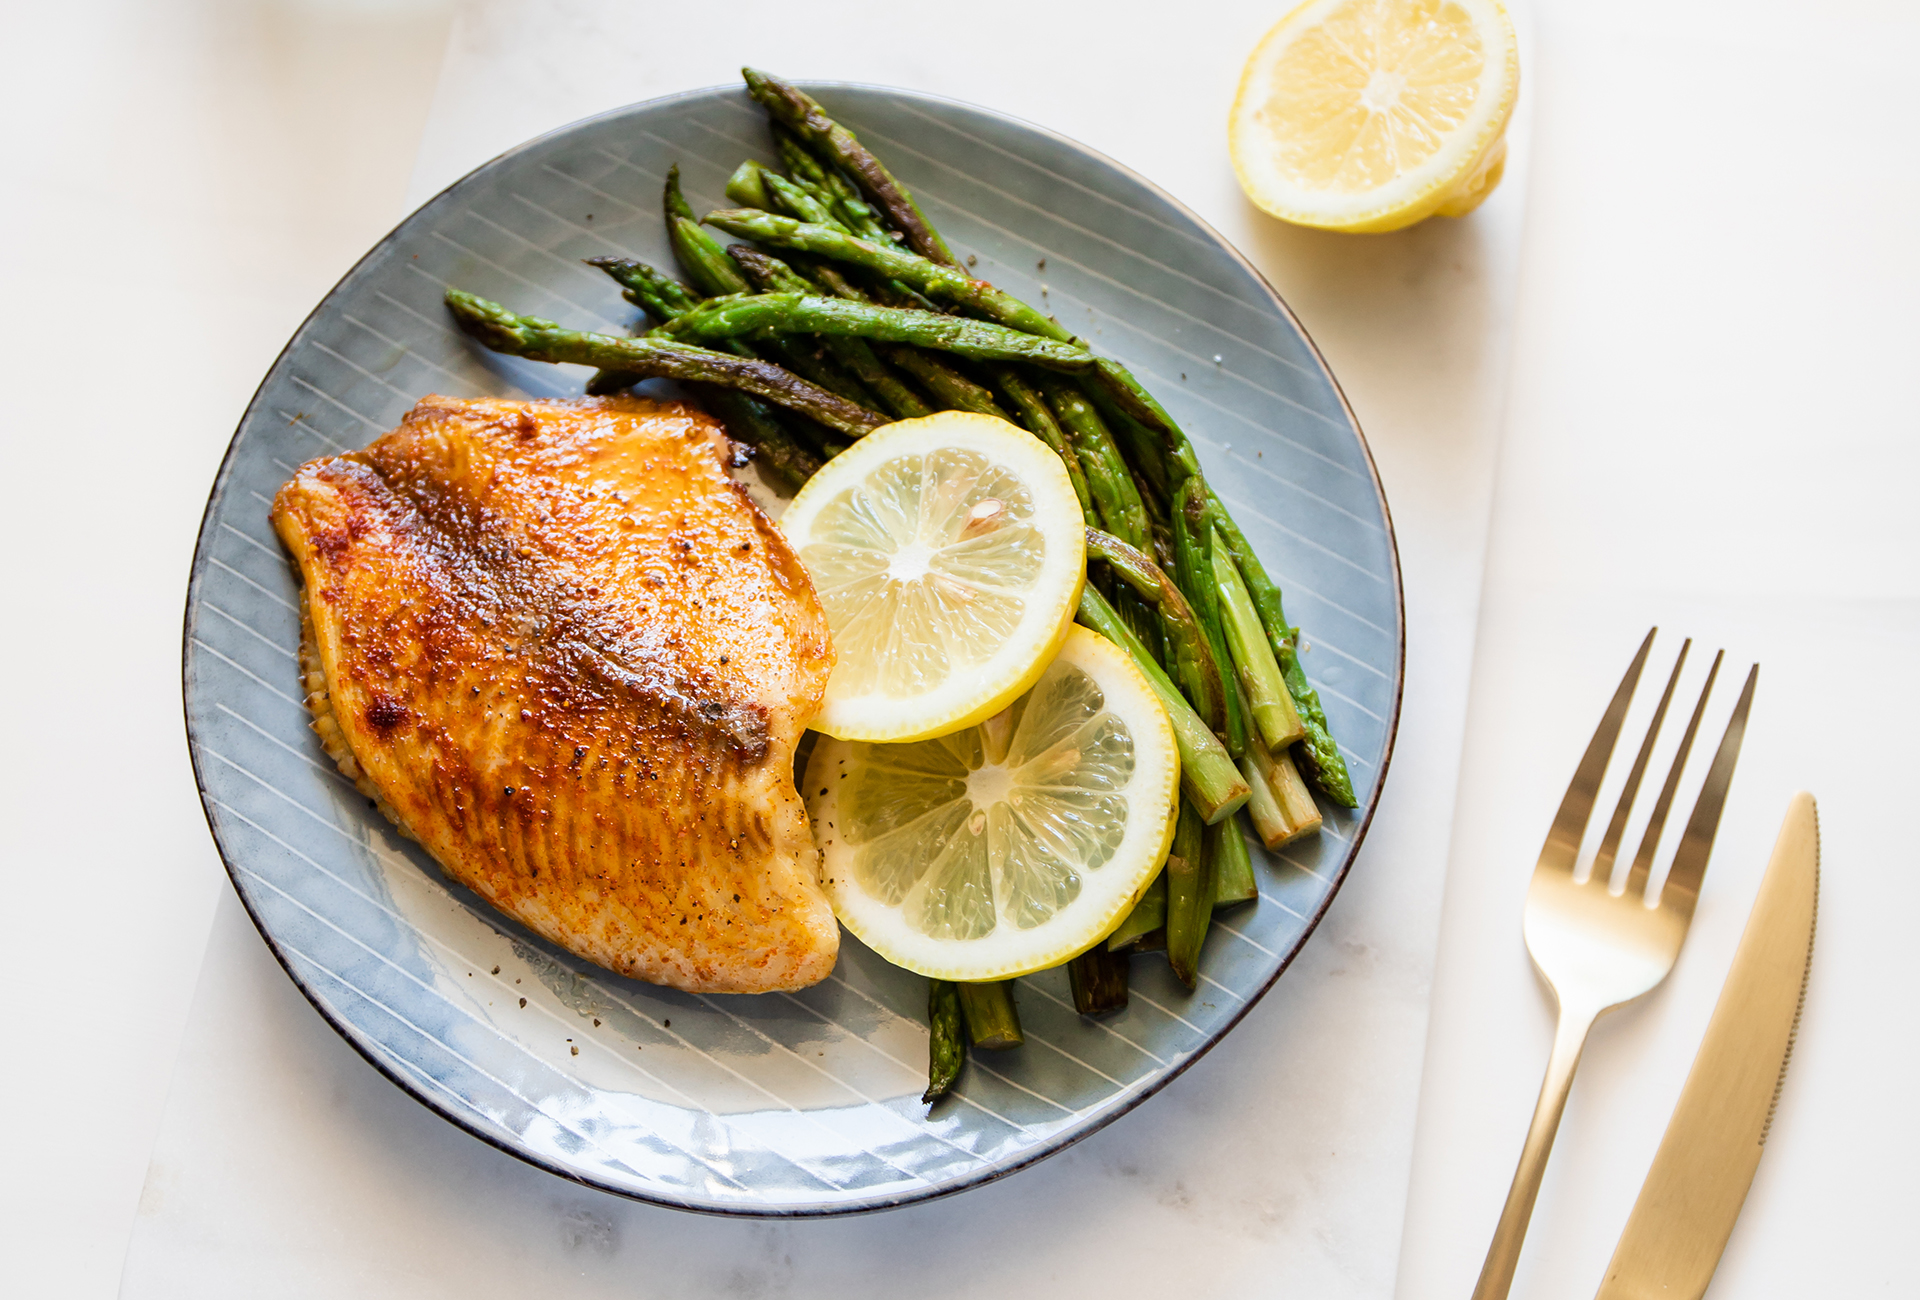 Roasted tilapia fish with asparagus on a ceramic plate. Healthy mediterranean diet lunch or dinner. Top view, flat lay.